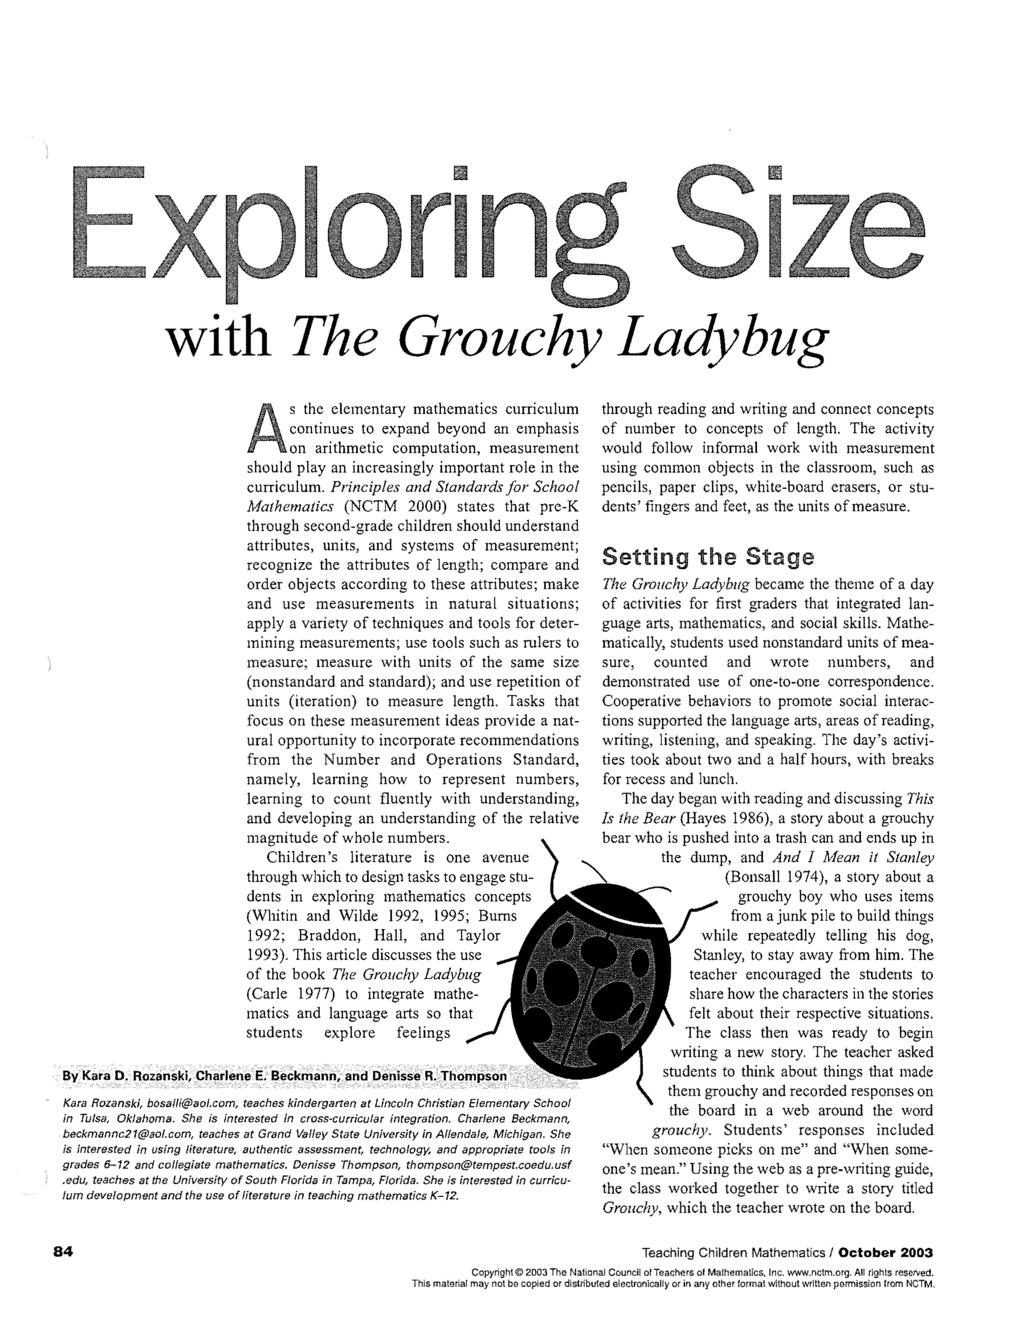 with The Grouchy Ladybug s the elementary mathematics curriculum continues to expand beyond an emphasis on arithmetic computation, measurement should play an increasingly important role in the